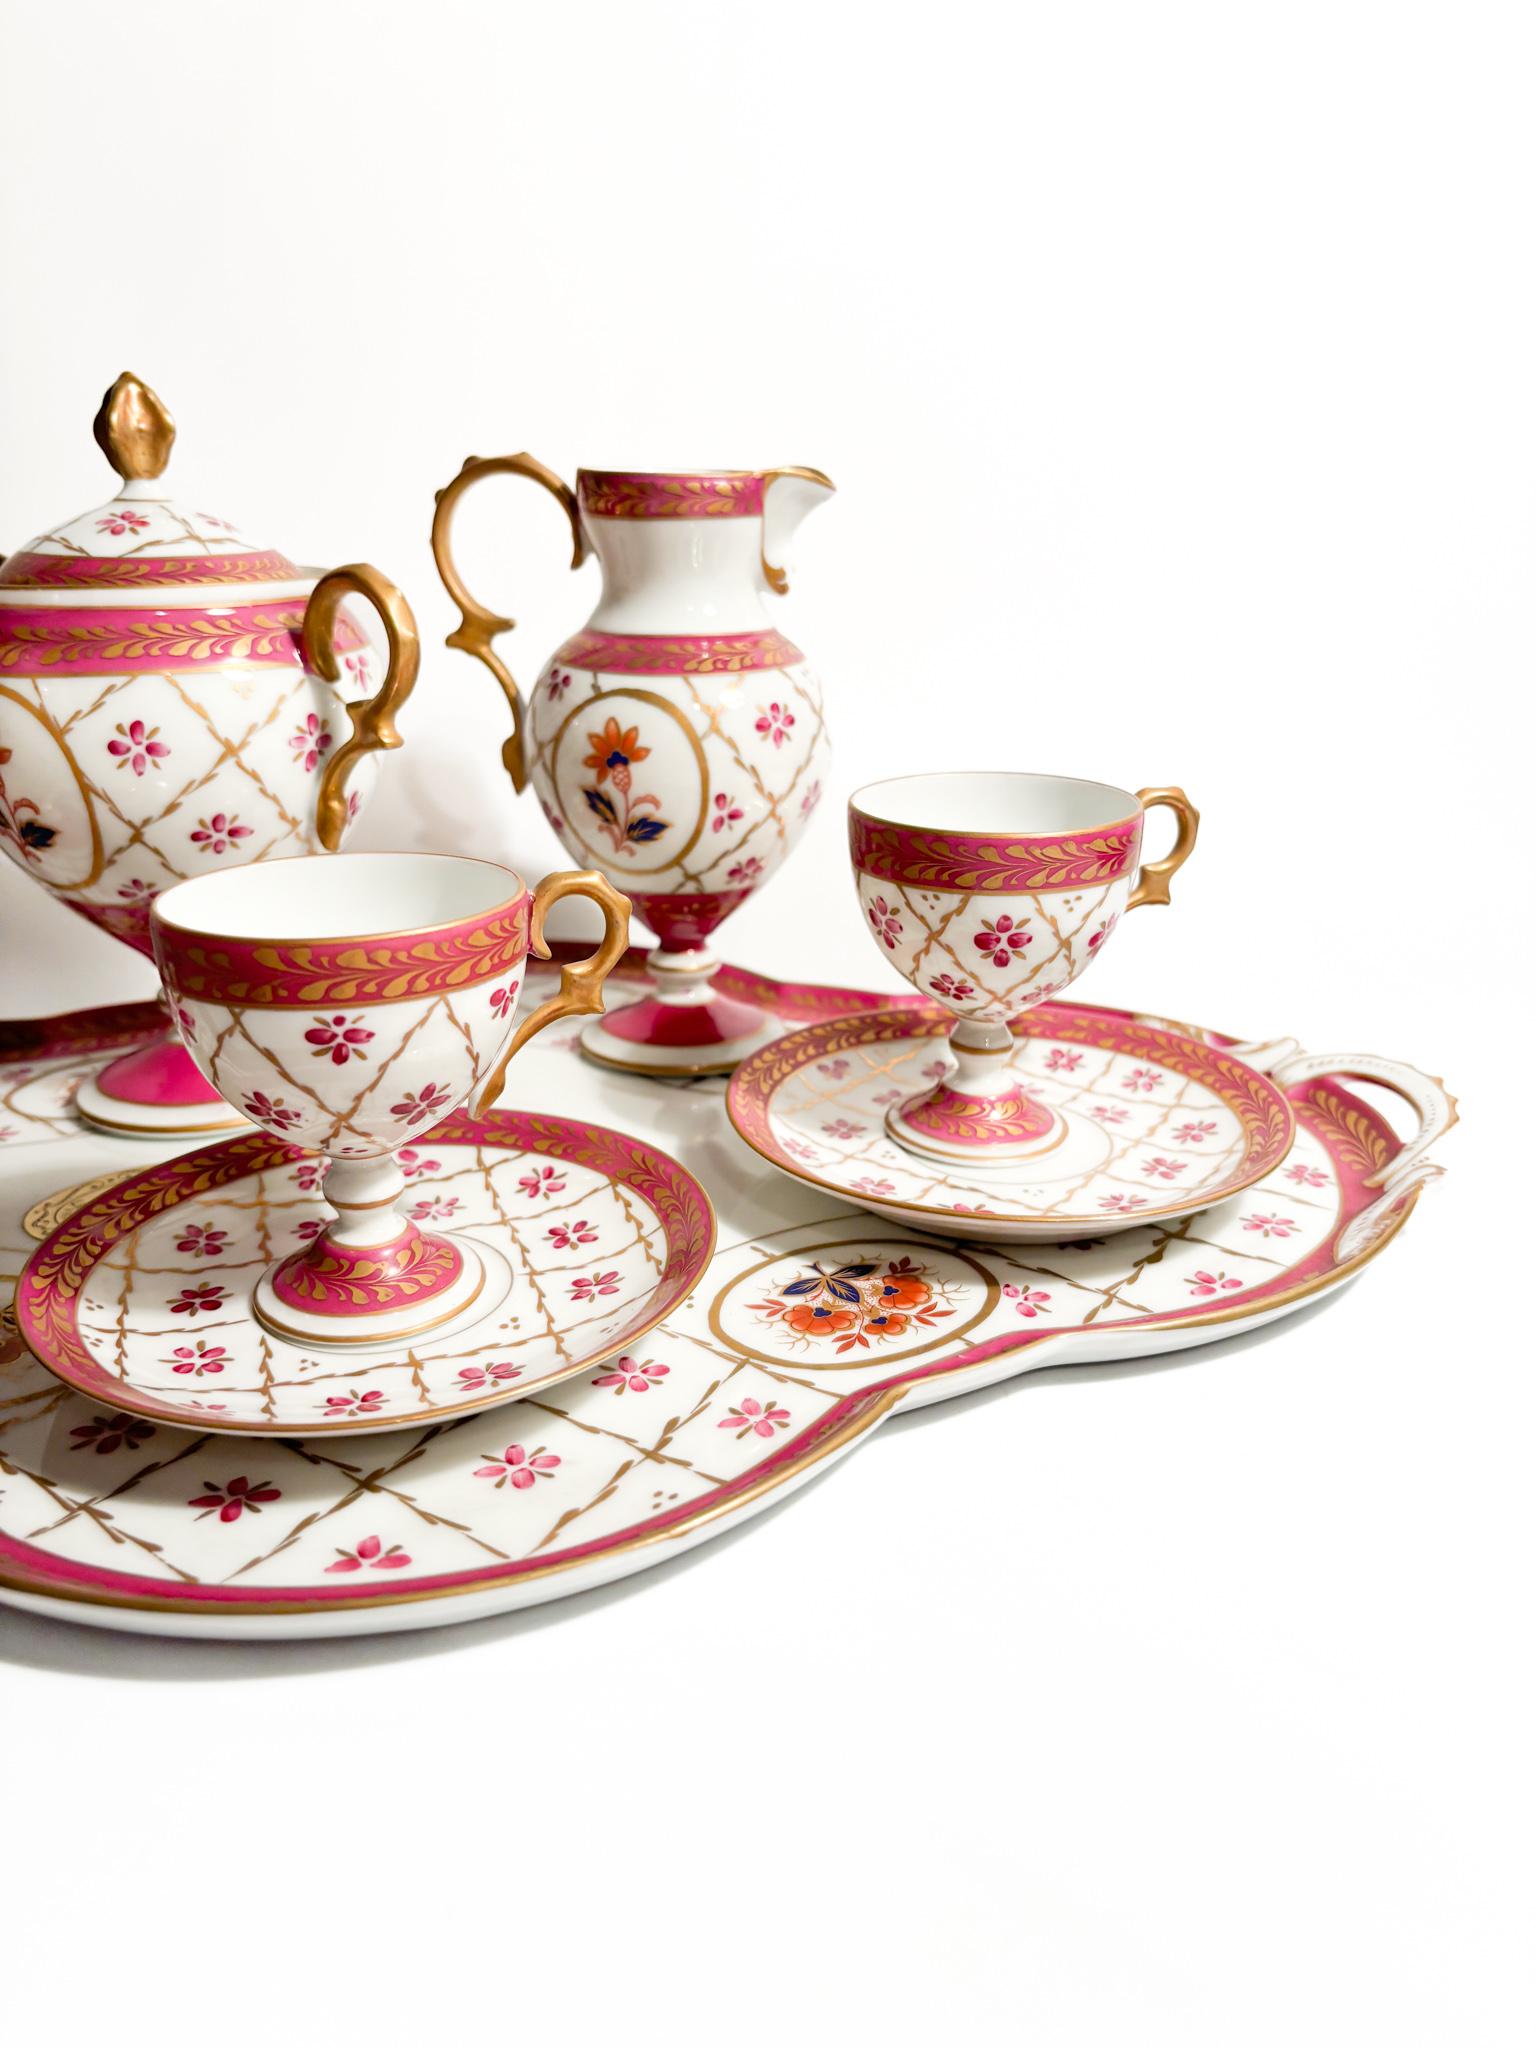 Tête-à-tête Coffee Set in Limoges Porcelain from the 1950s For Sale 2